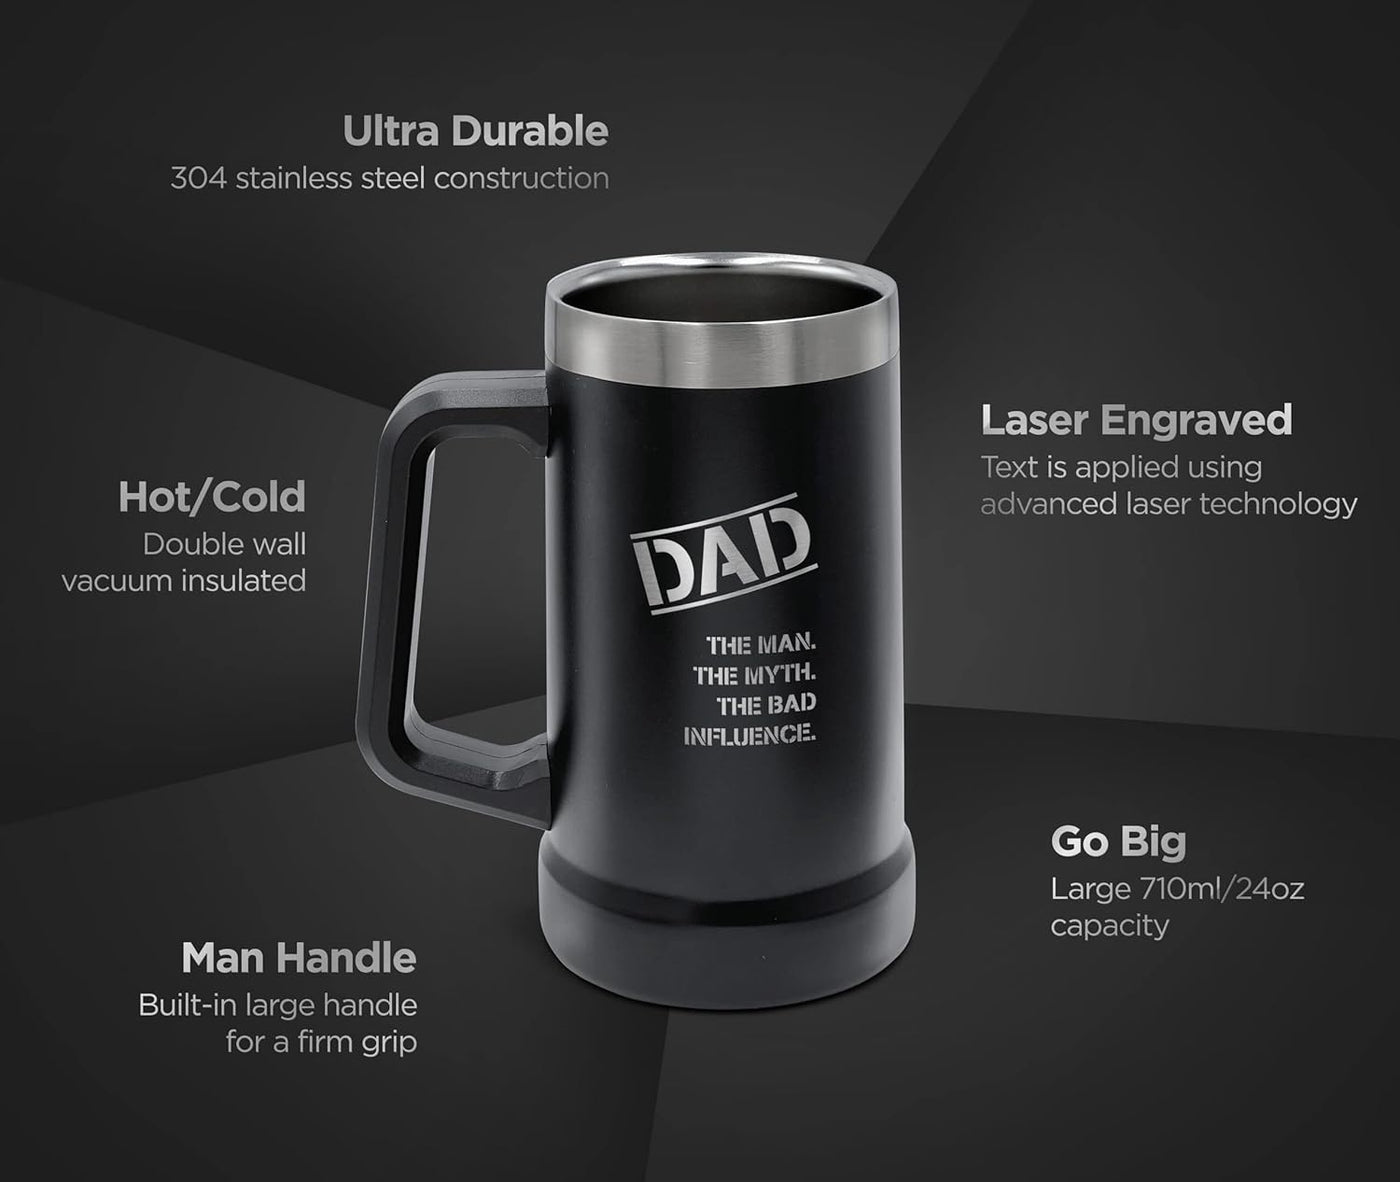 SoHo Funny Beer Mug Gifts for Dad - Stainless Steel Insulated XL 24oz Tumbler Cup with Handle “Dad, Man, Myth, Bad Influence” (Fathers Day/Birthday/Christmas) Gift Boxed